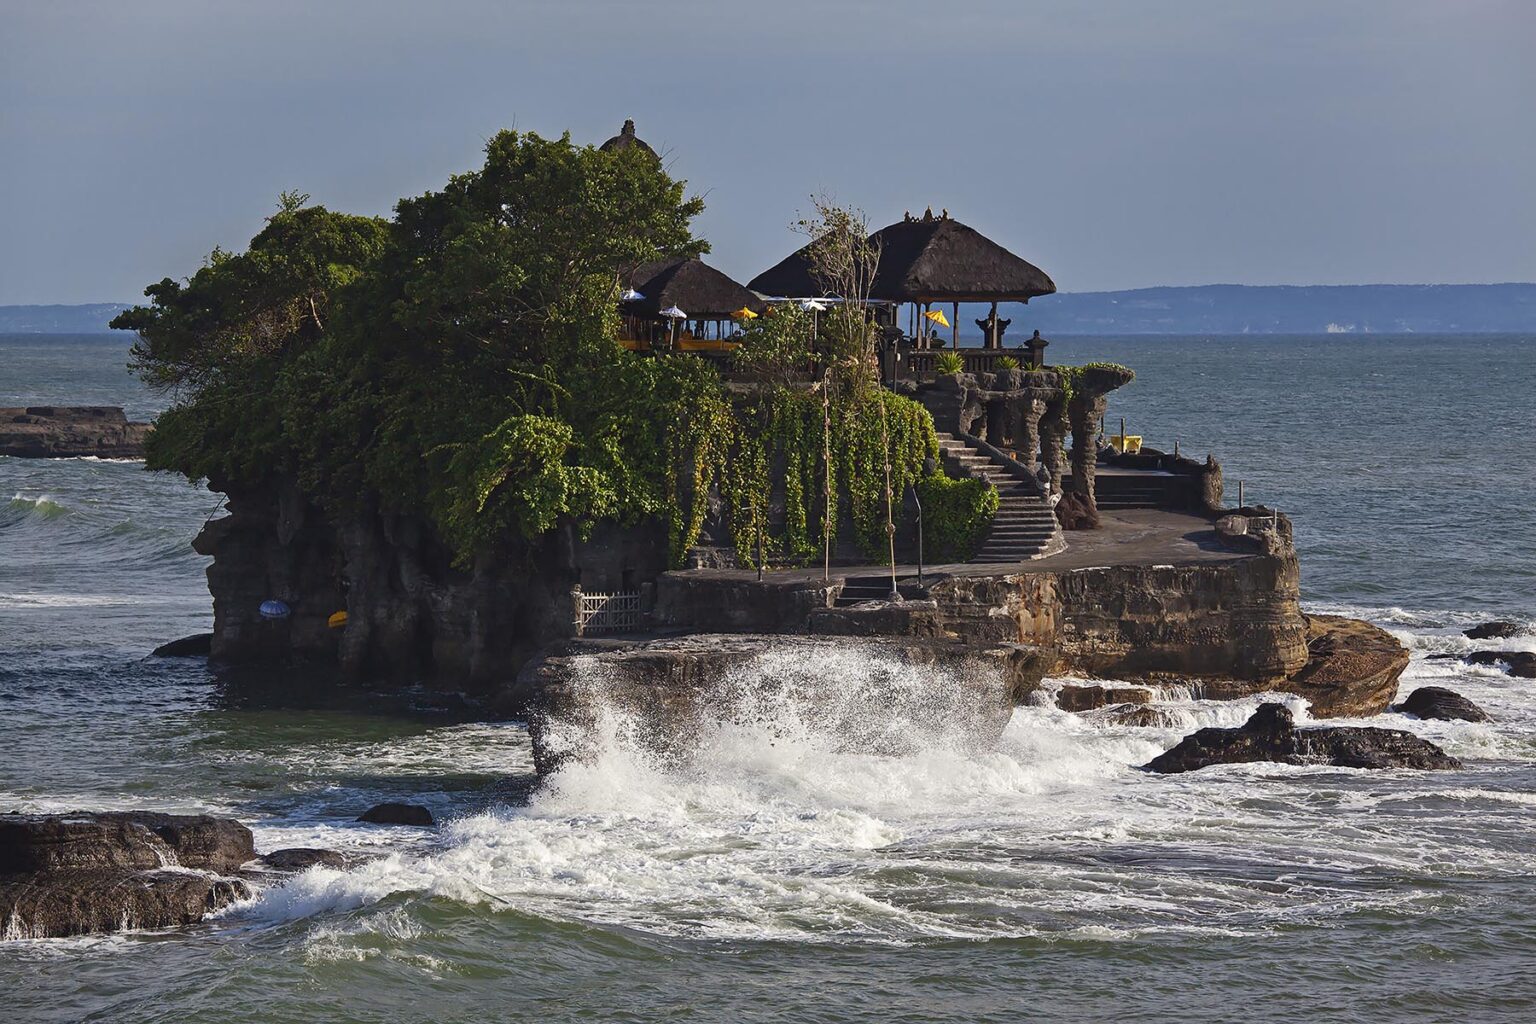 PURA TANAH LOT is one of the most important Hindu Sea Temples - BALI, INDONESIA